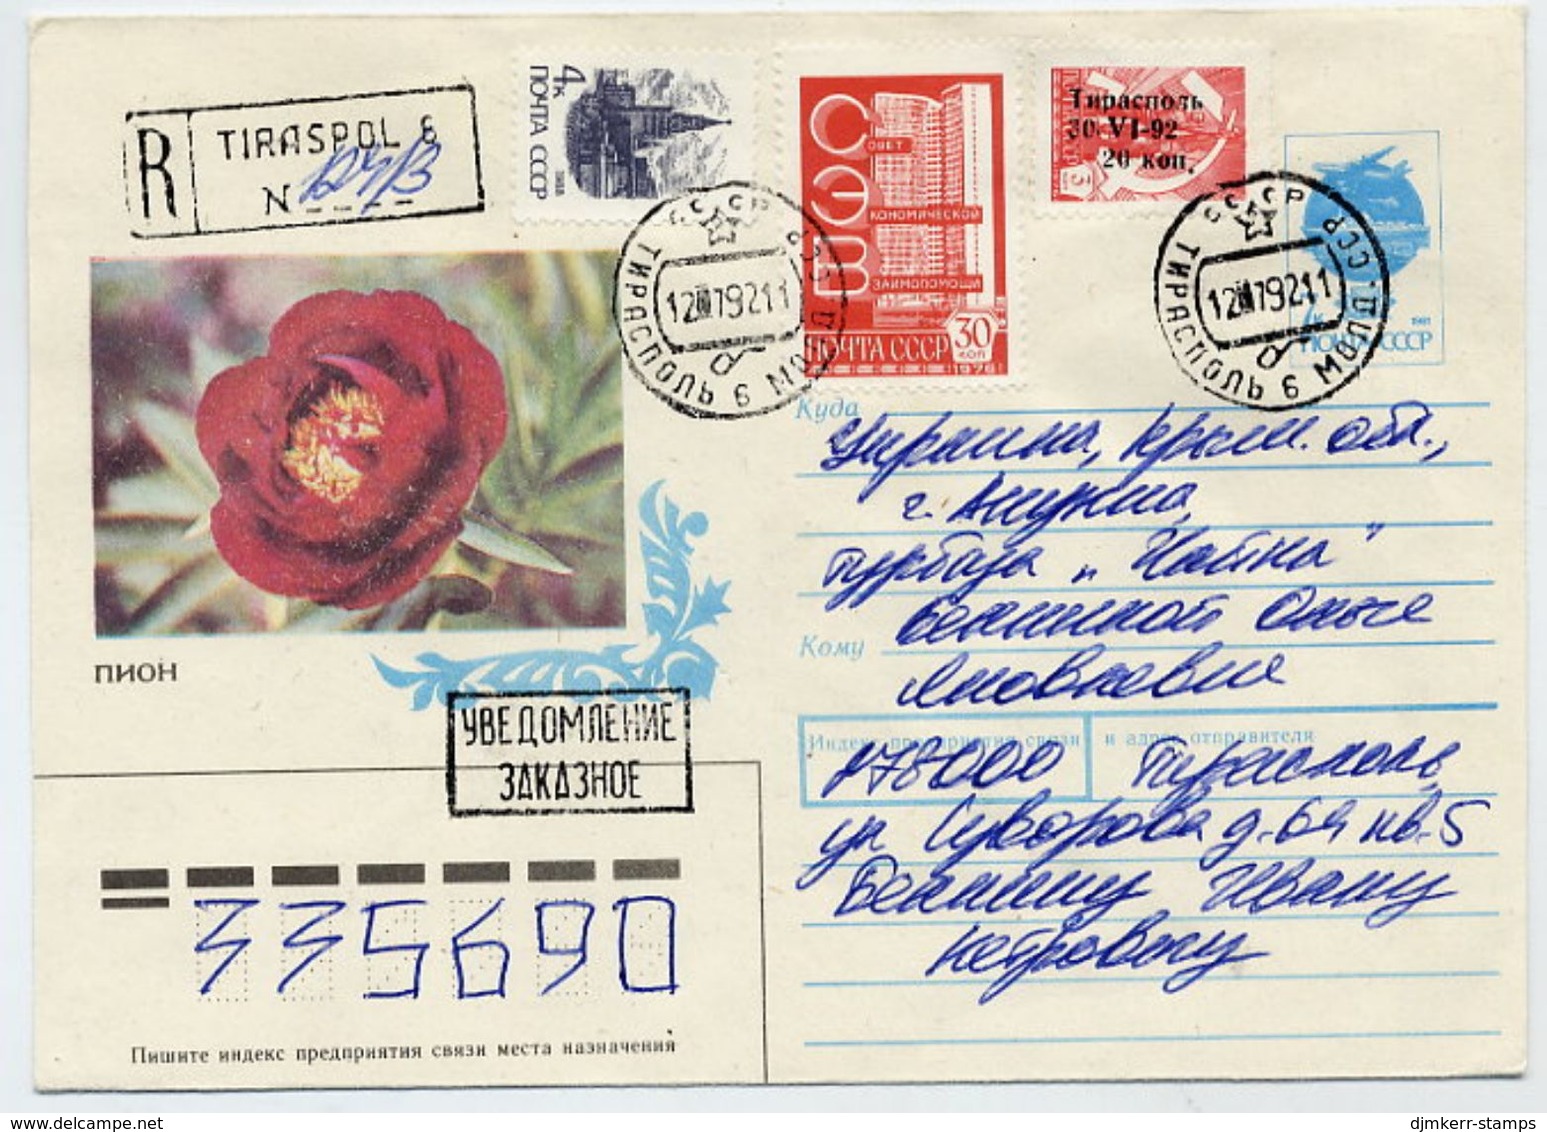 MOLDOVA 1992 Registered Cover With Tiraspol Local Overprint In Combination With Soviet Union Stamps. - Moldova